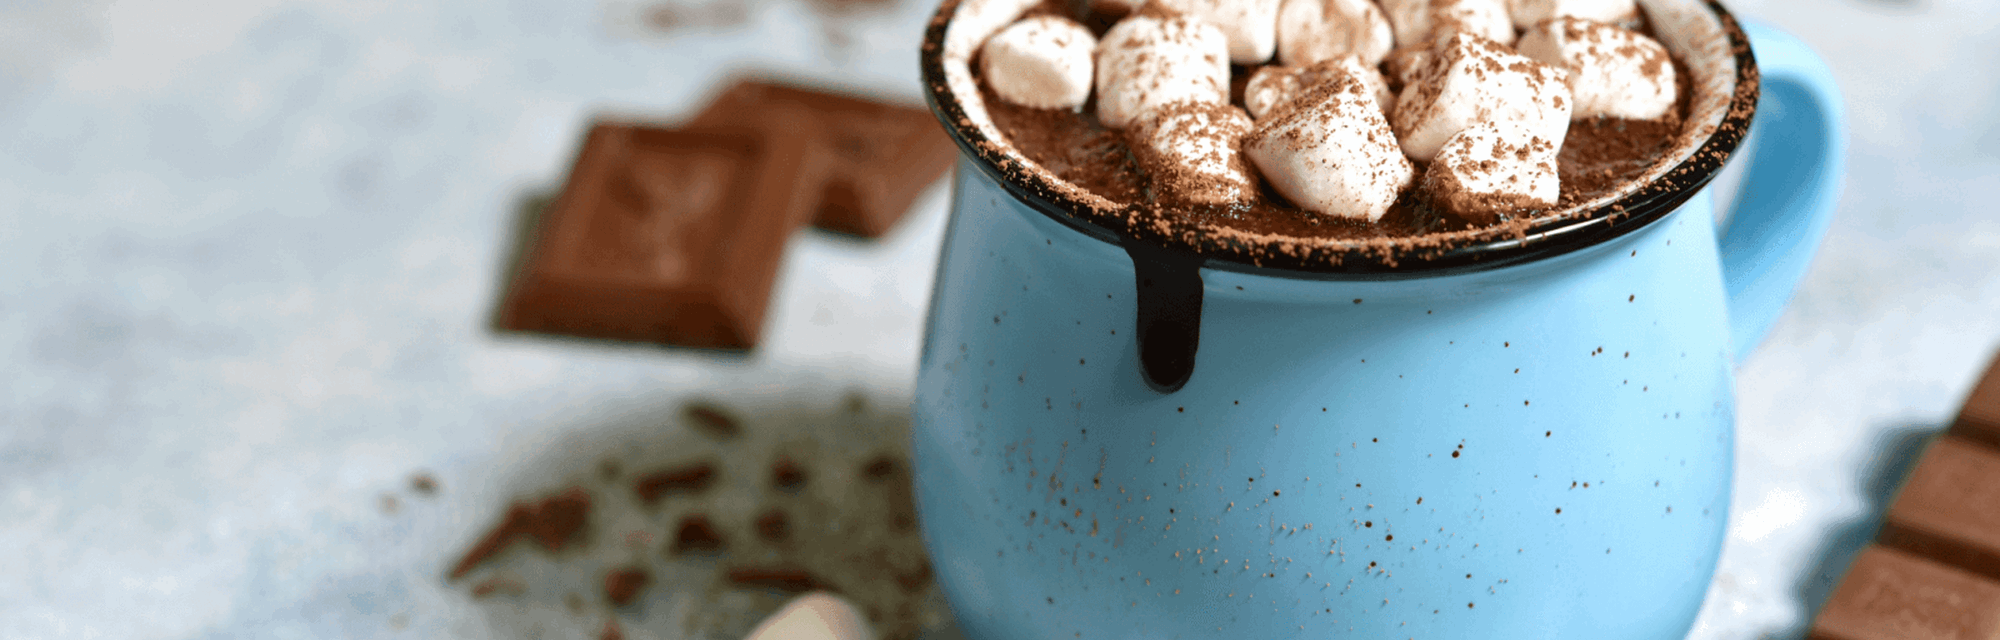 Hot chocolate with rum